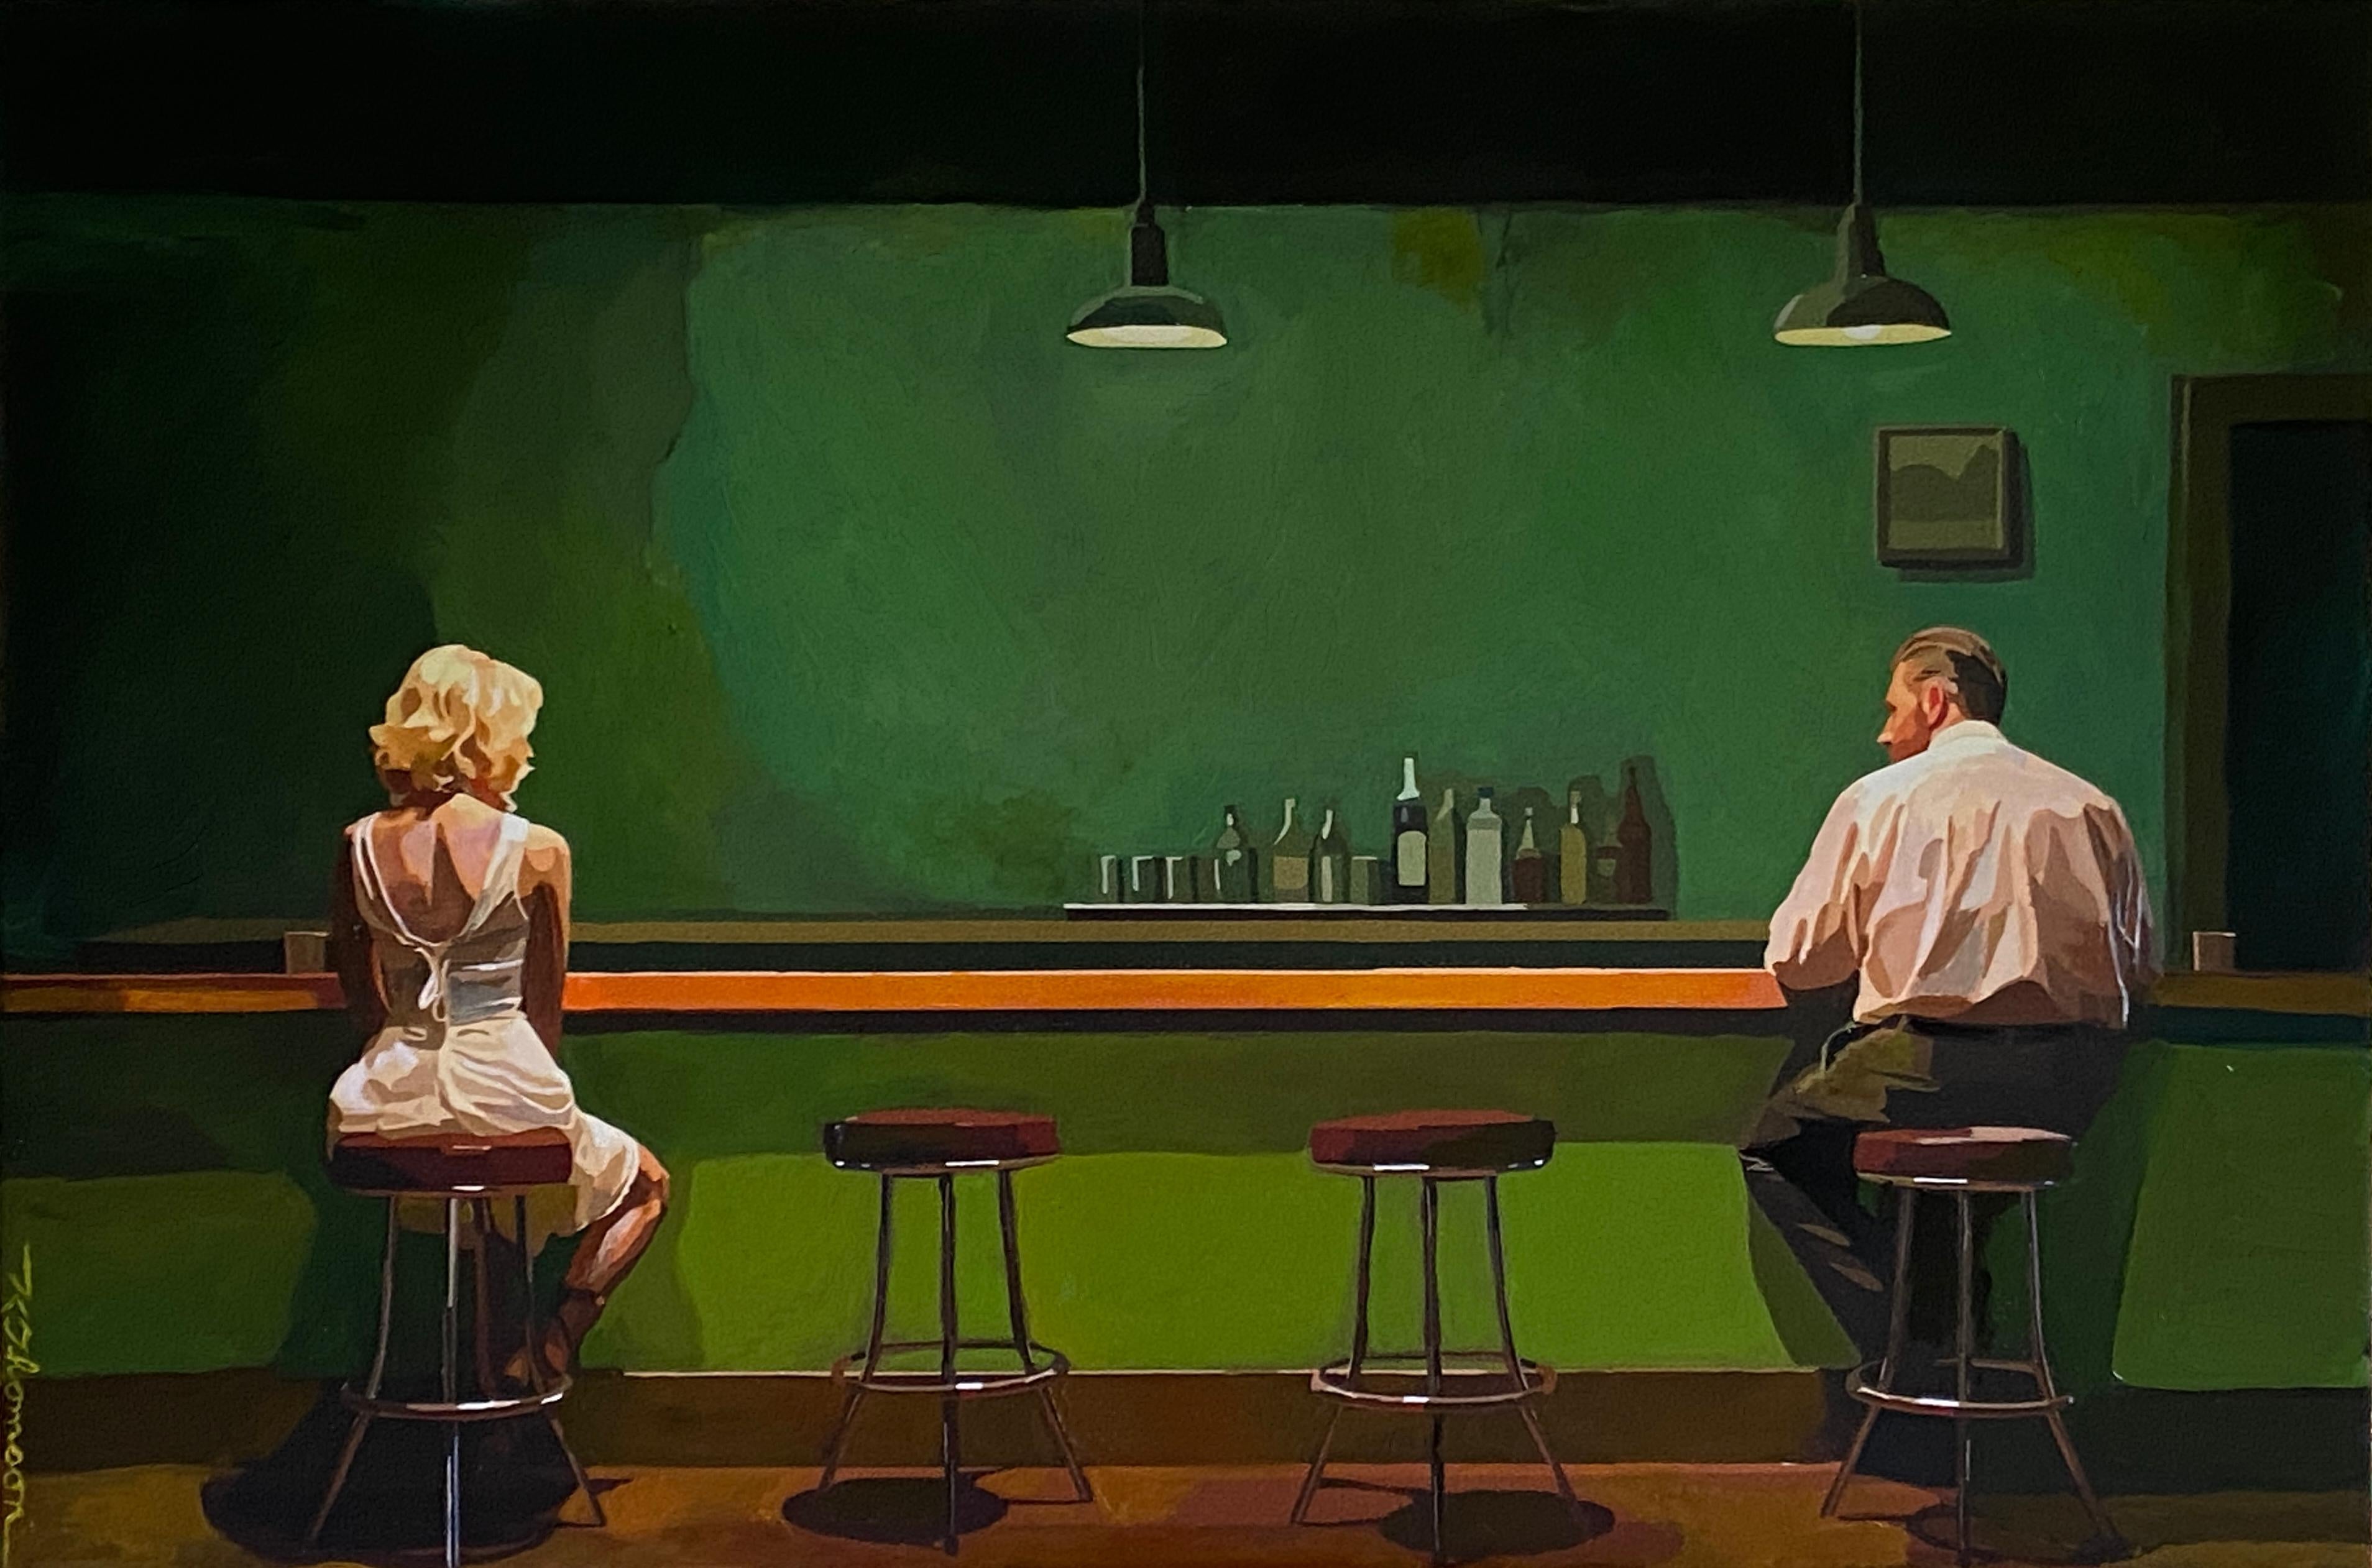 Sunday Night at the Clover, Original Painting - Mixed Media Art by Keith Thomson